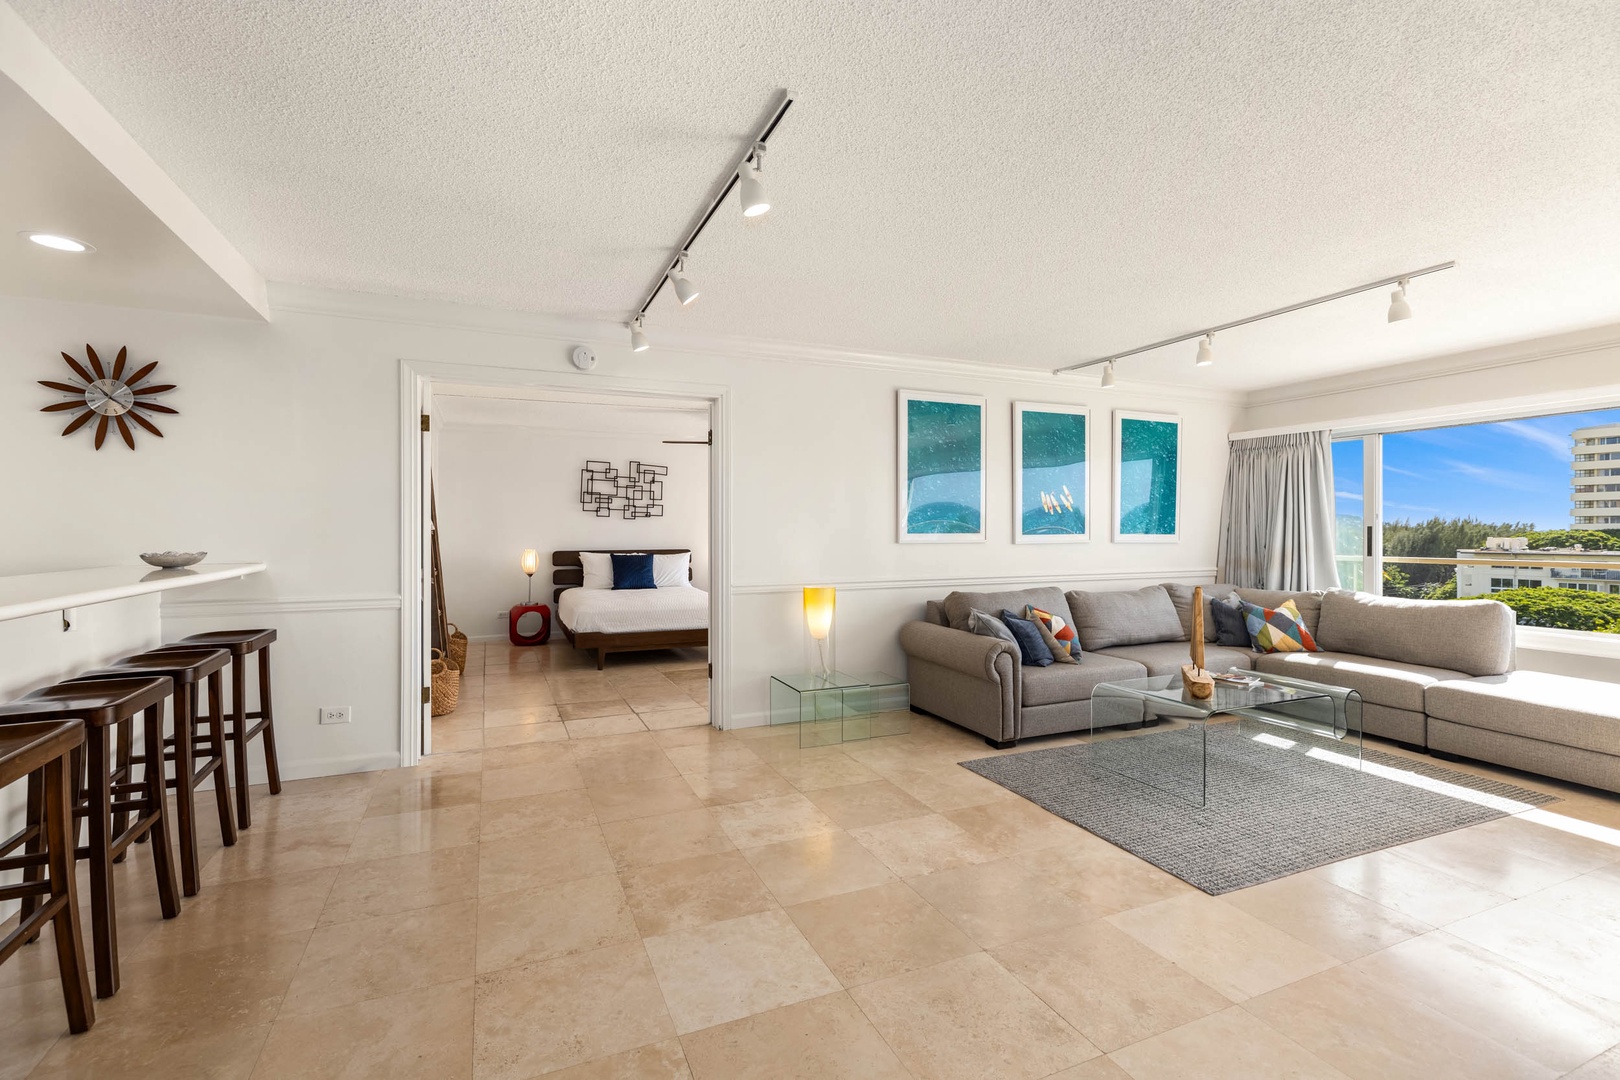 Honolulu Vacation Rentals, Colony Surf Getaway - Open-concept layout featuring a comfortable living area that flows into a cozy bedroom, ideal for rest and relaxation.